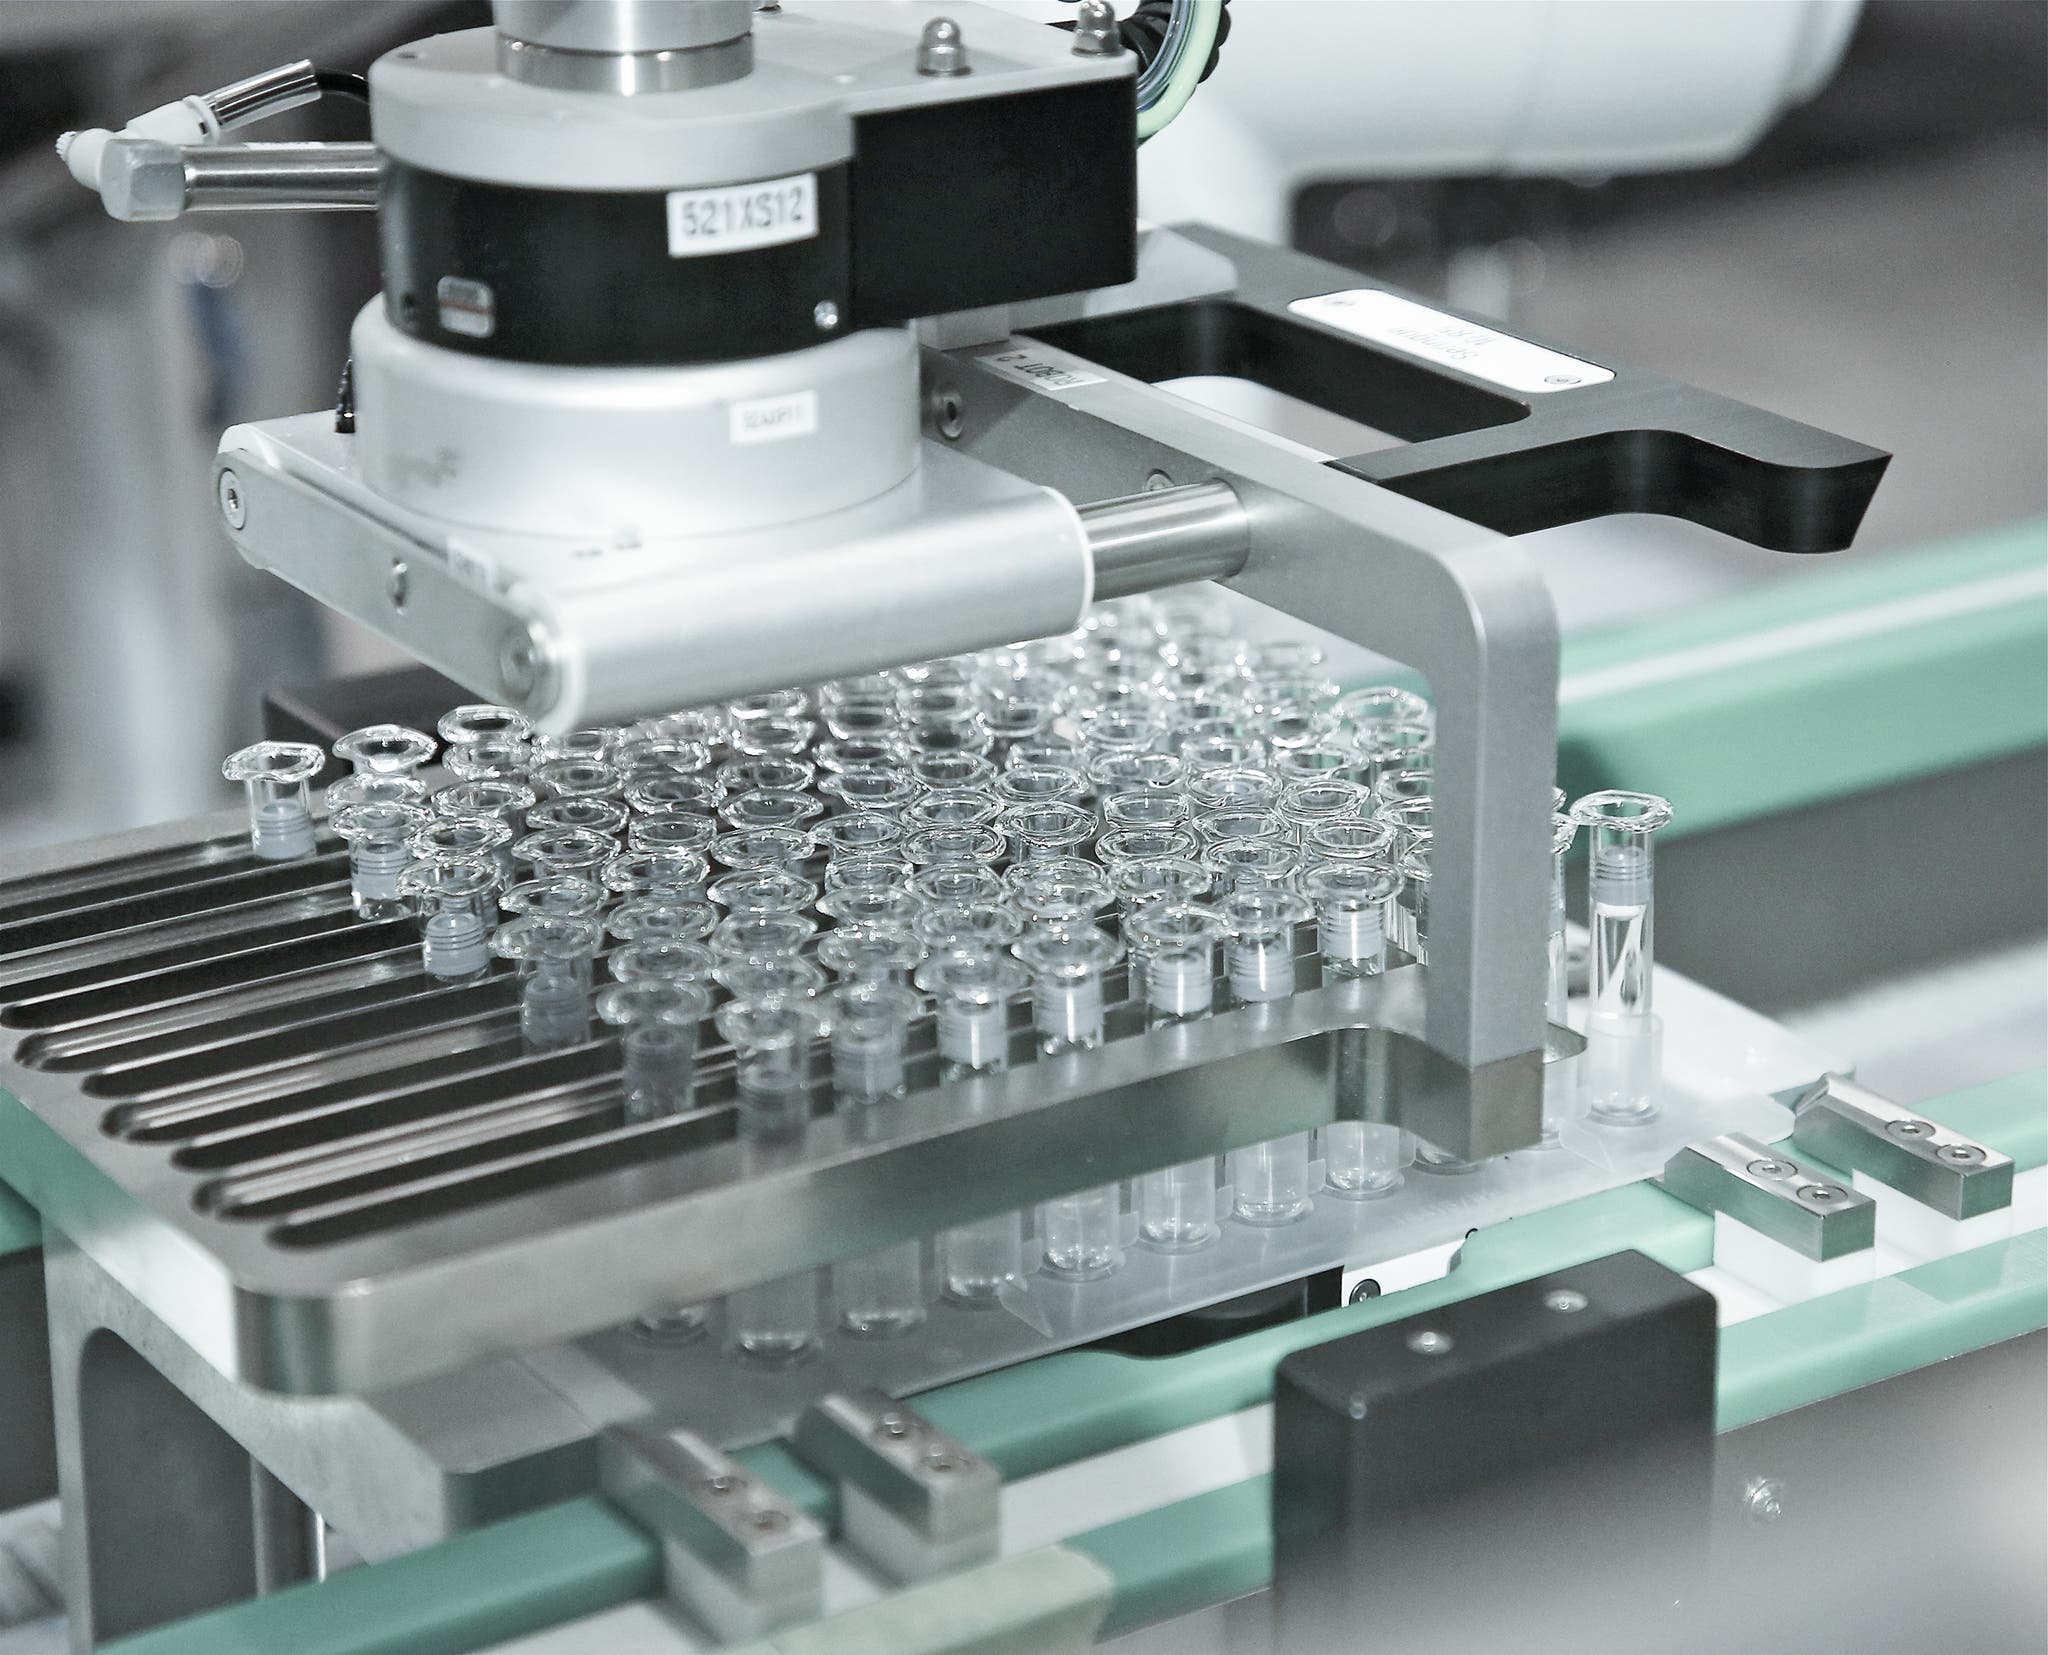 Automated inspection and filling of syringes